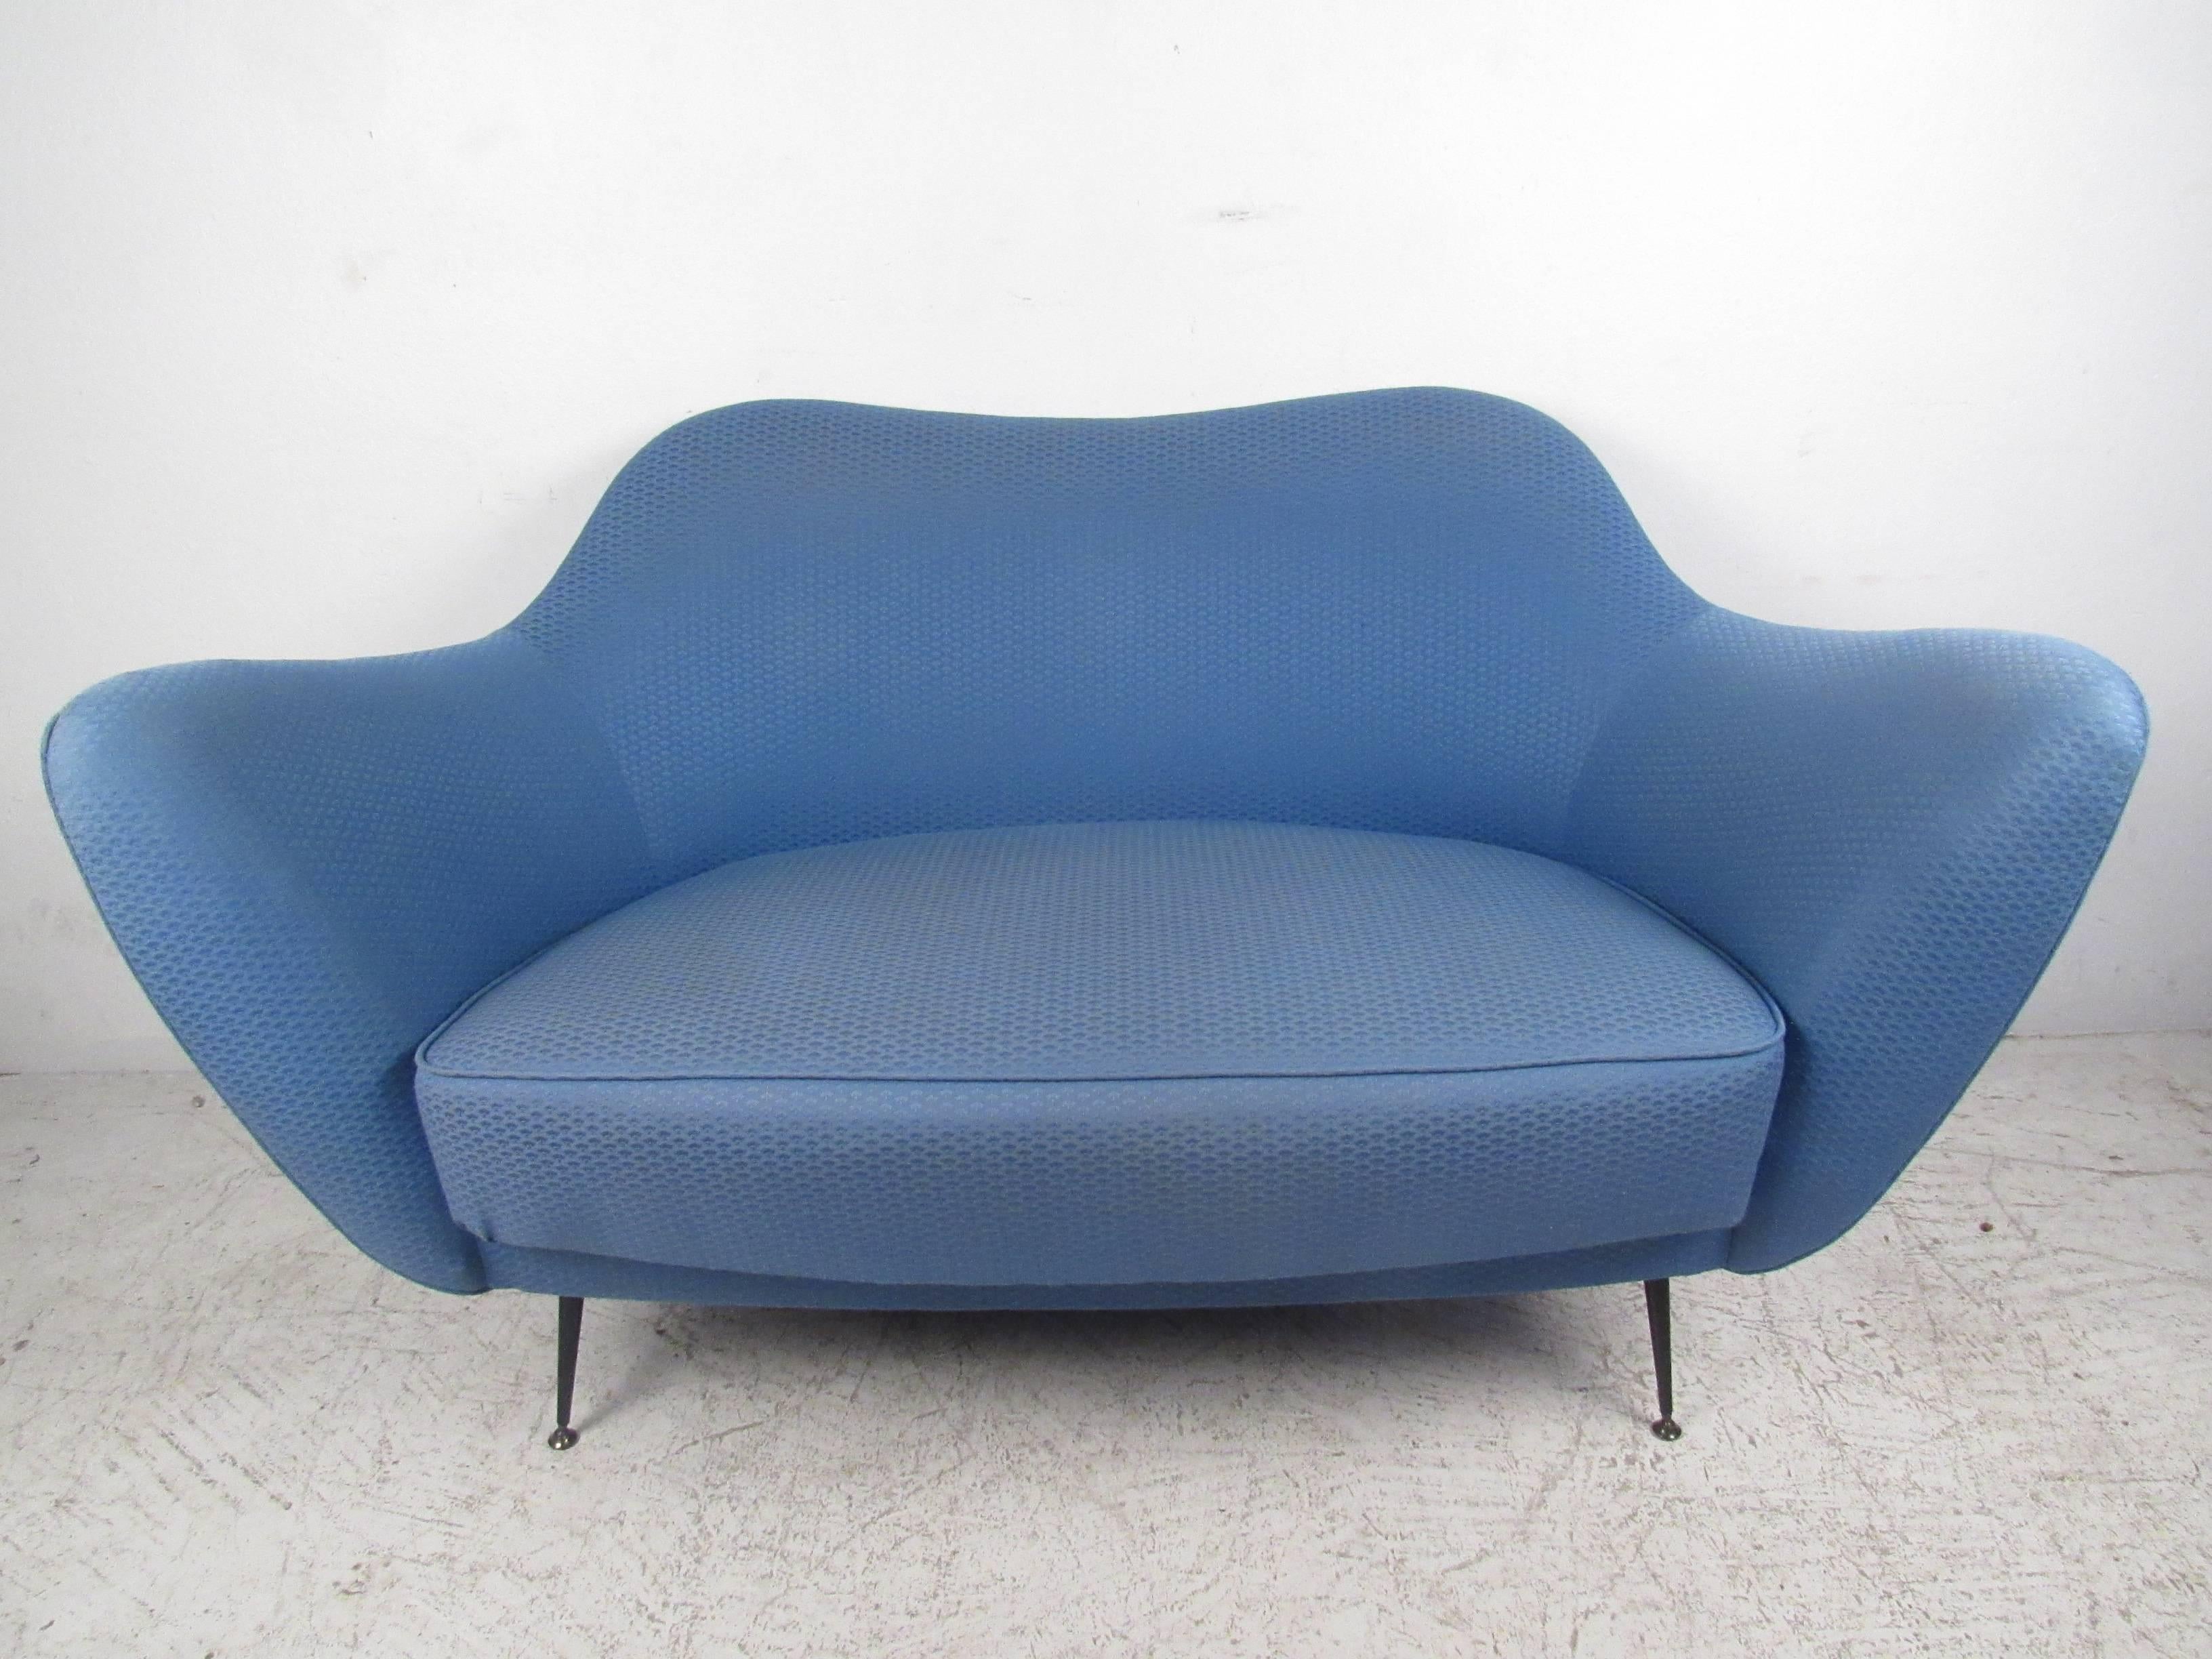 This unique midcentury loveseat features a beautiful sculpted back, tapered brass trim legs, and lovely vintage fabric. This comfortable and stylish two-seater is ideal for a variety of interiors. Pair of matching lounge chairs available, please